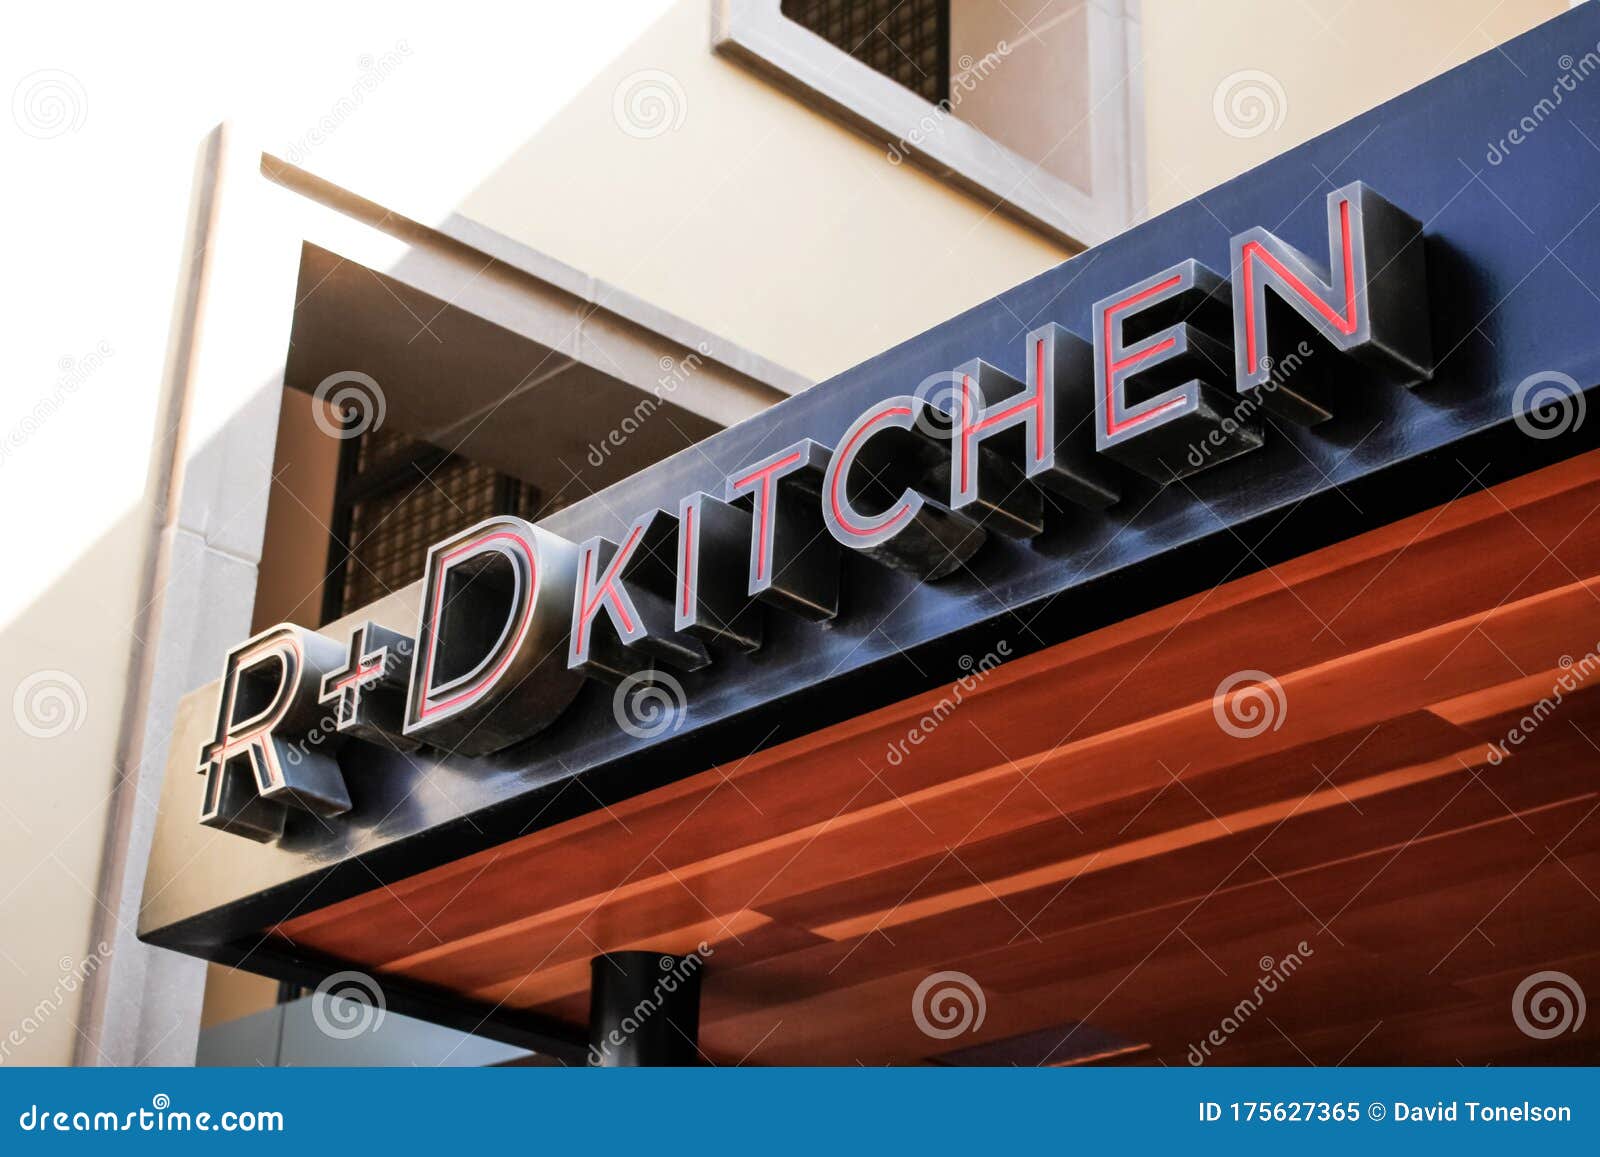 R D Kitchen Sign Store Front Upscale Restaurant Known As Located Newport Beach California 175627365 